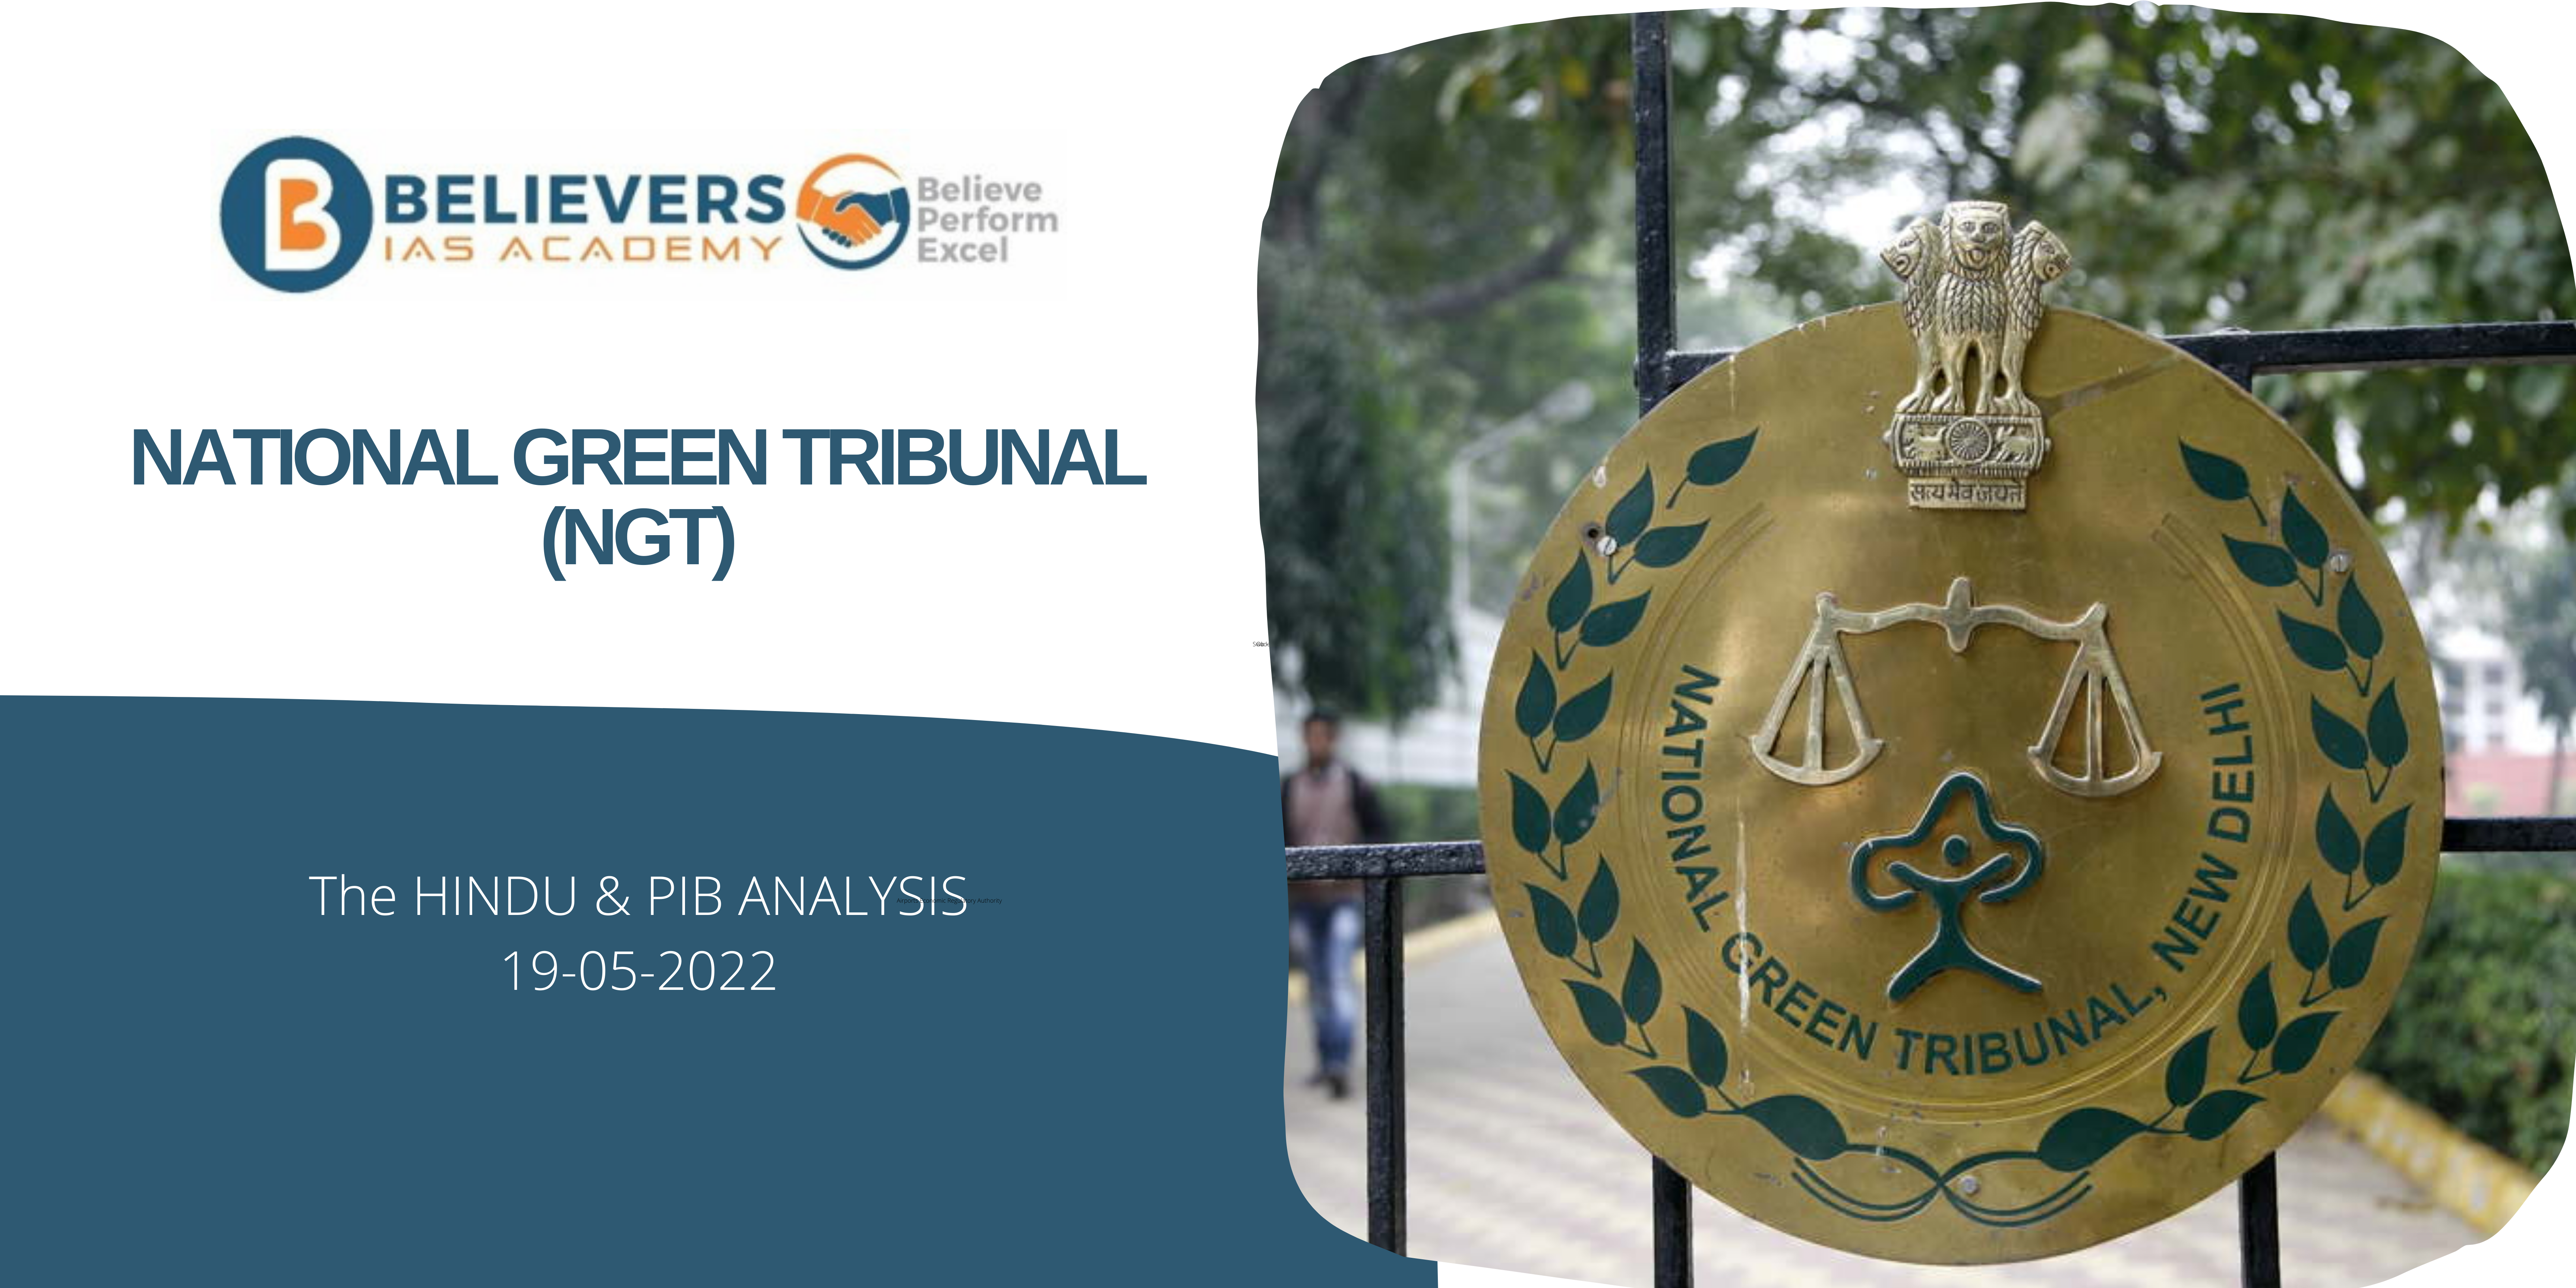 Civil services Current affairs - National Green Tribunal (NGT)